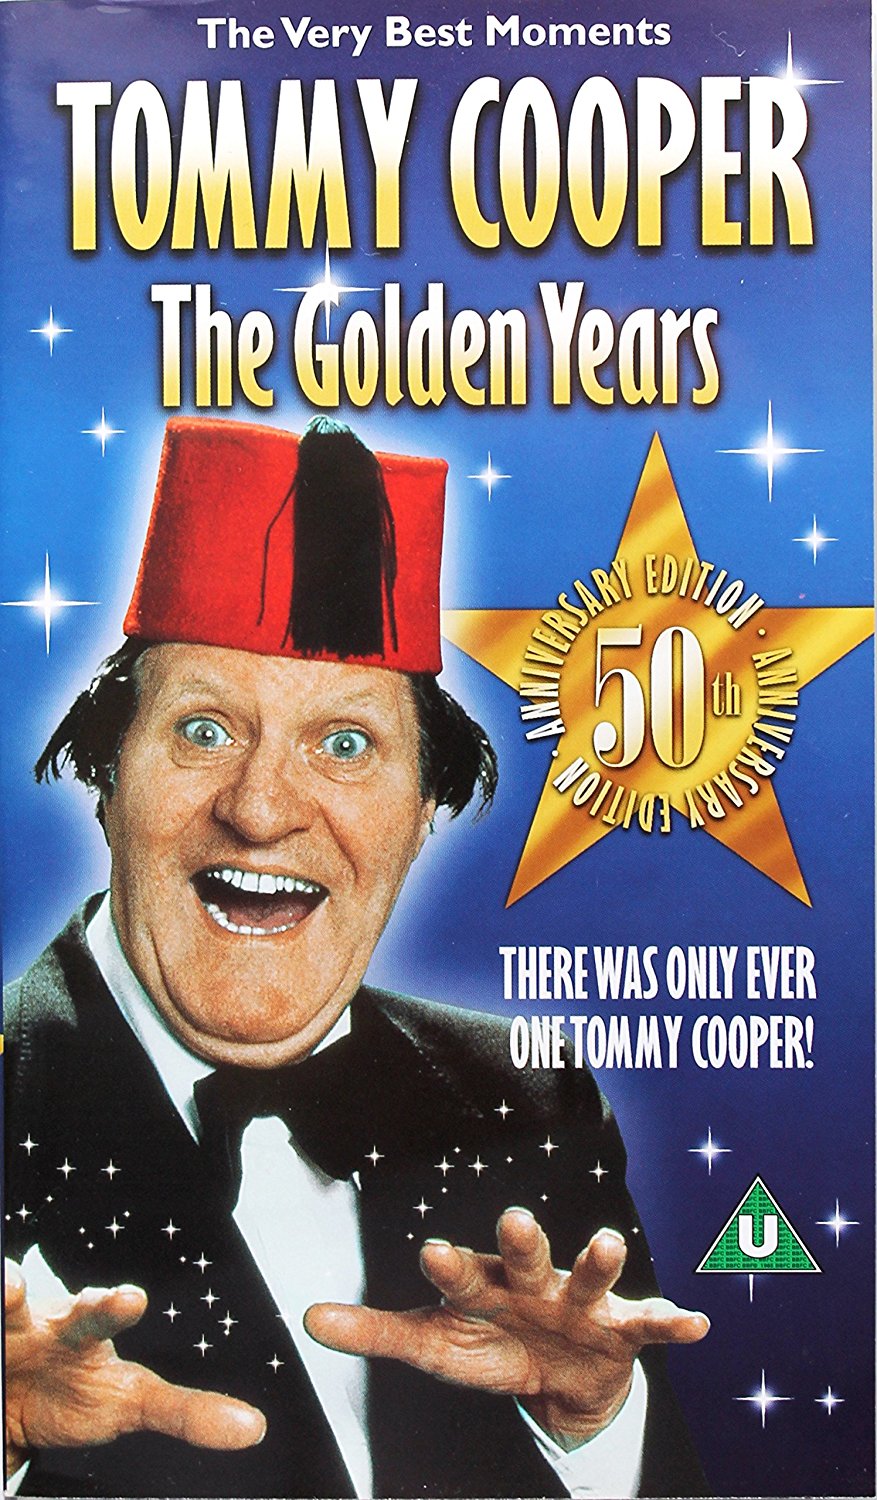 Tommy Cooper: Masters of Comedy: Tommy Cooper: 9781860513602